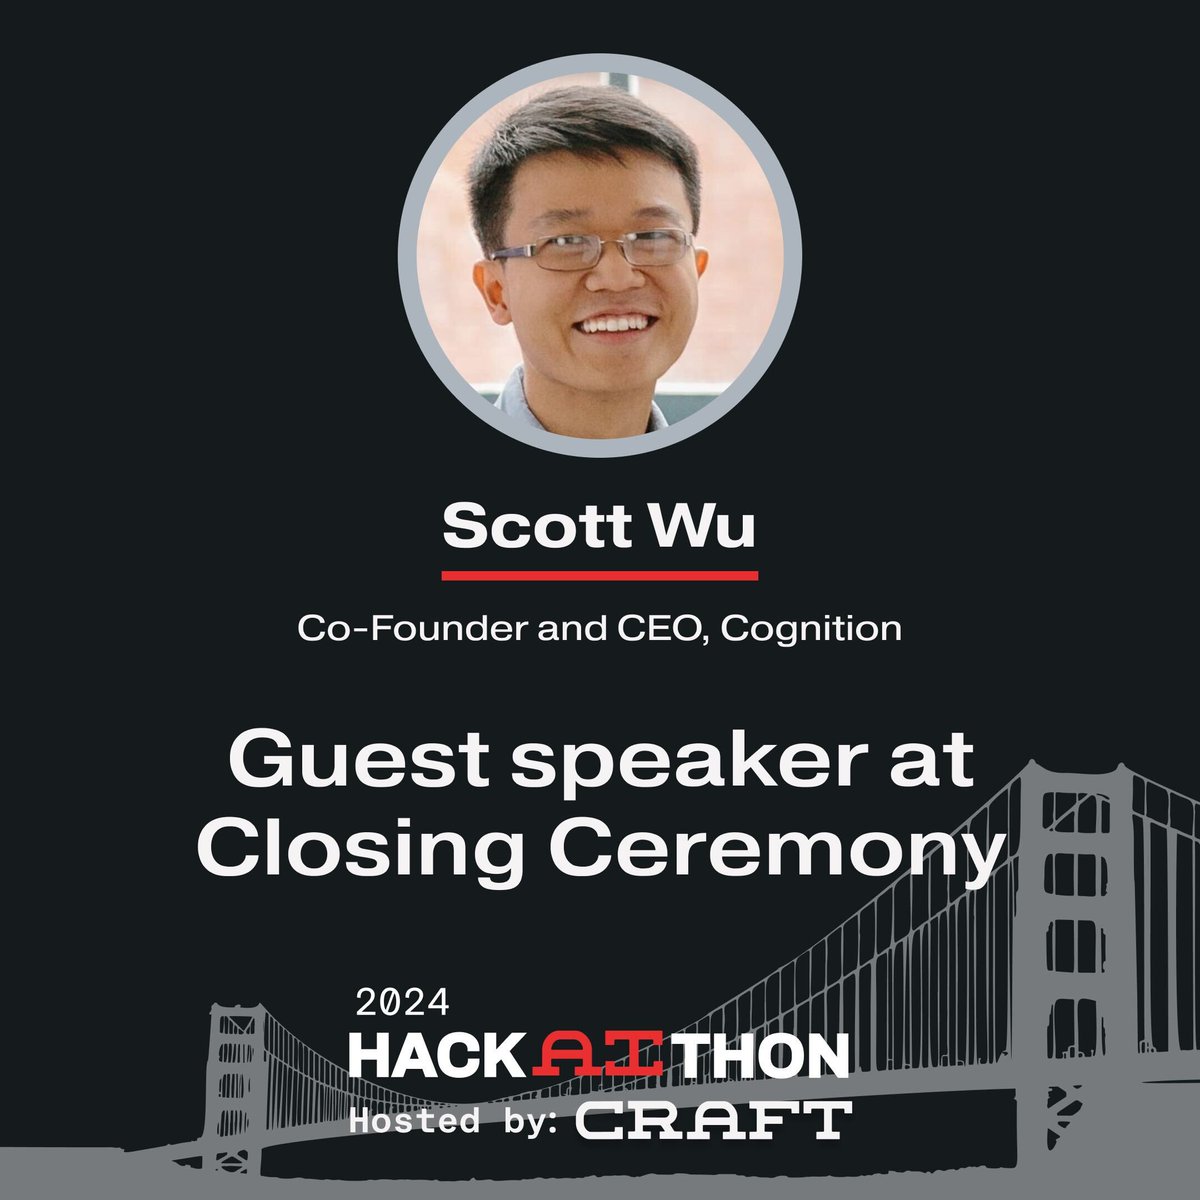 🥁 drumroll, please...🥁 we're excited to announce a special guest speaker at the HackAIthon Closing Ceremony... @ScottWu46 of @cognition_labs! Between naming a grand prize winner, announcing $20K in cash prizes (and even more in credits!), plus Scott joining us, this closing